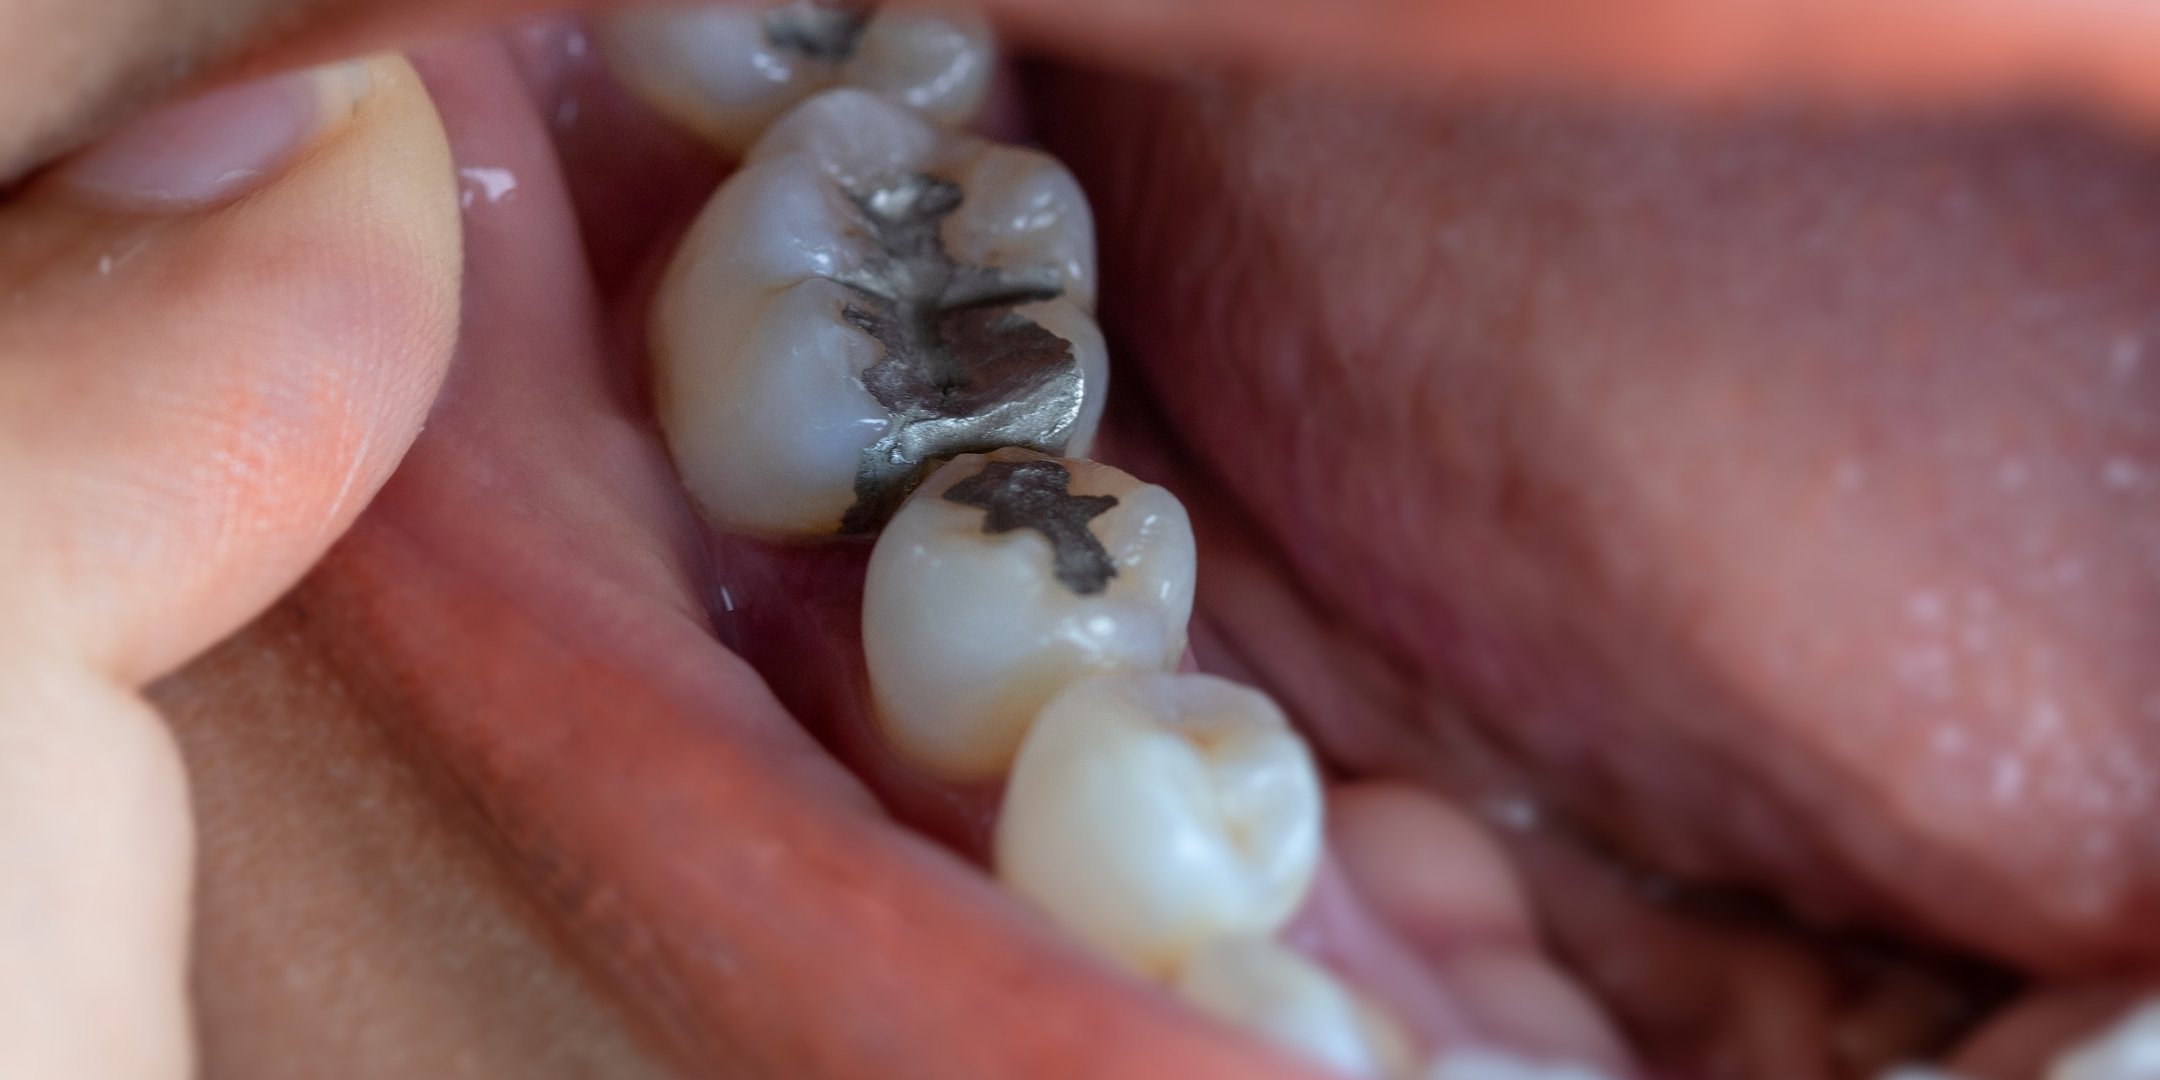 Loose Dental Filling: What Should You Do When You Spot It?